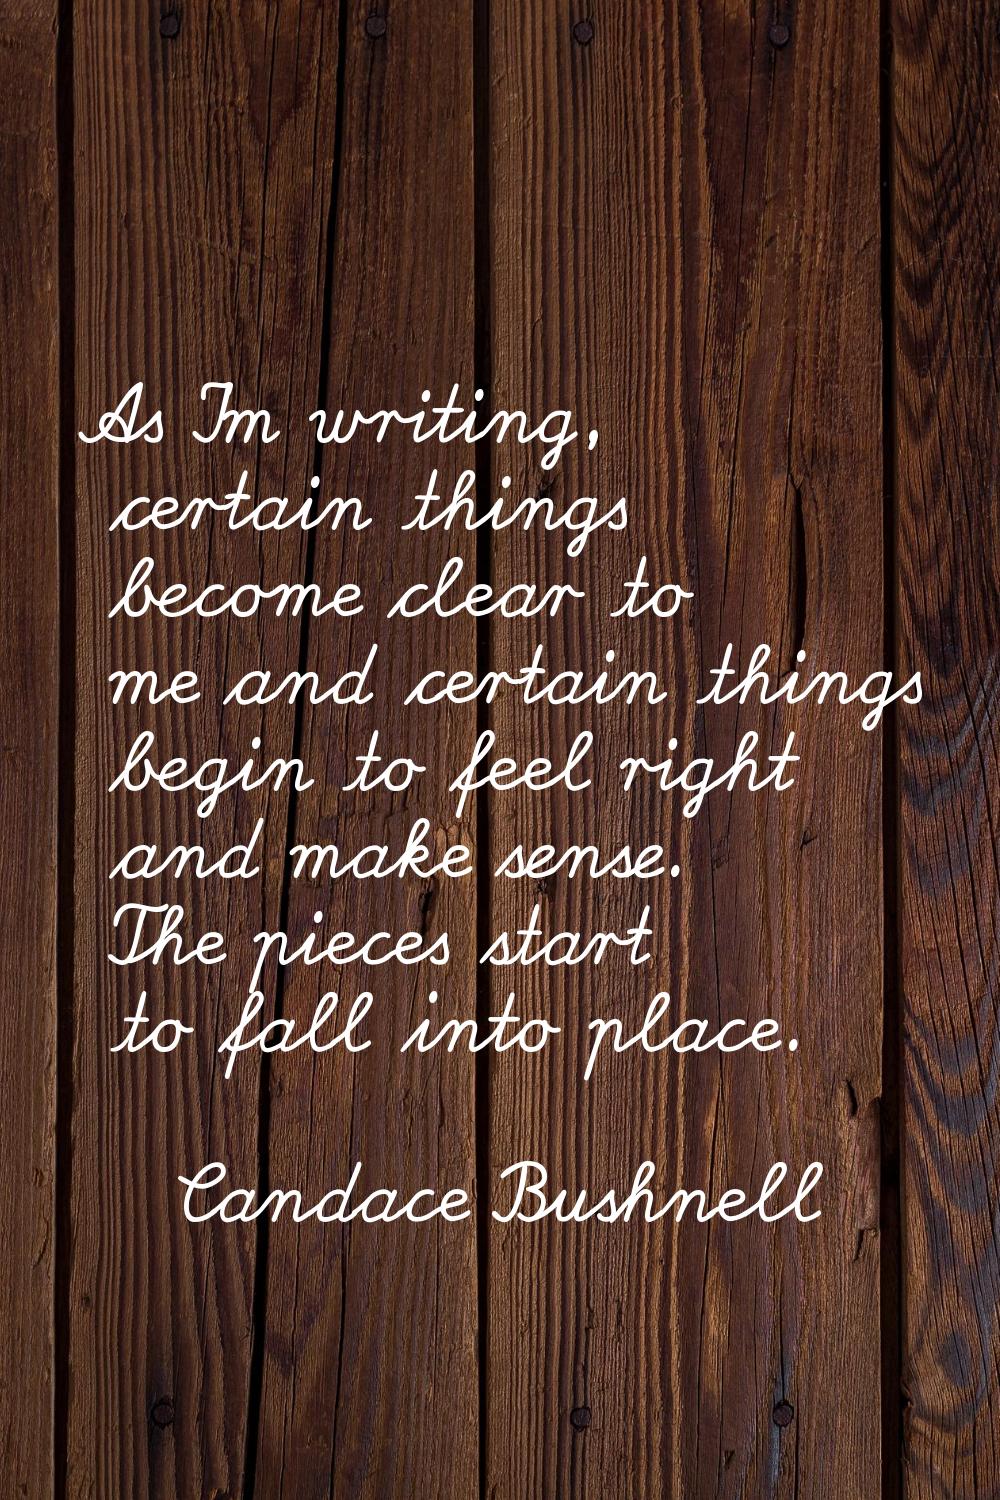 As I'm writing, certain things become clear to me and certain things begin to feel right and make s